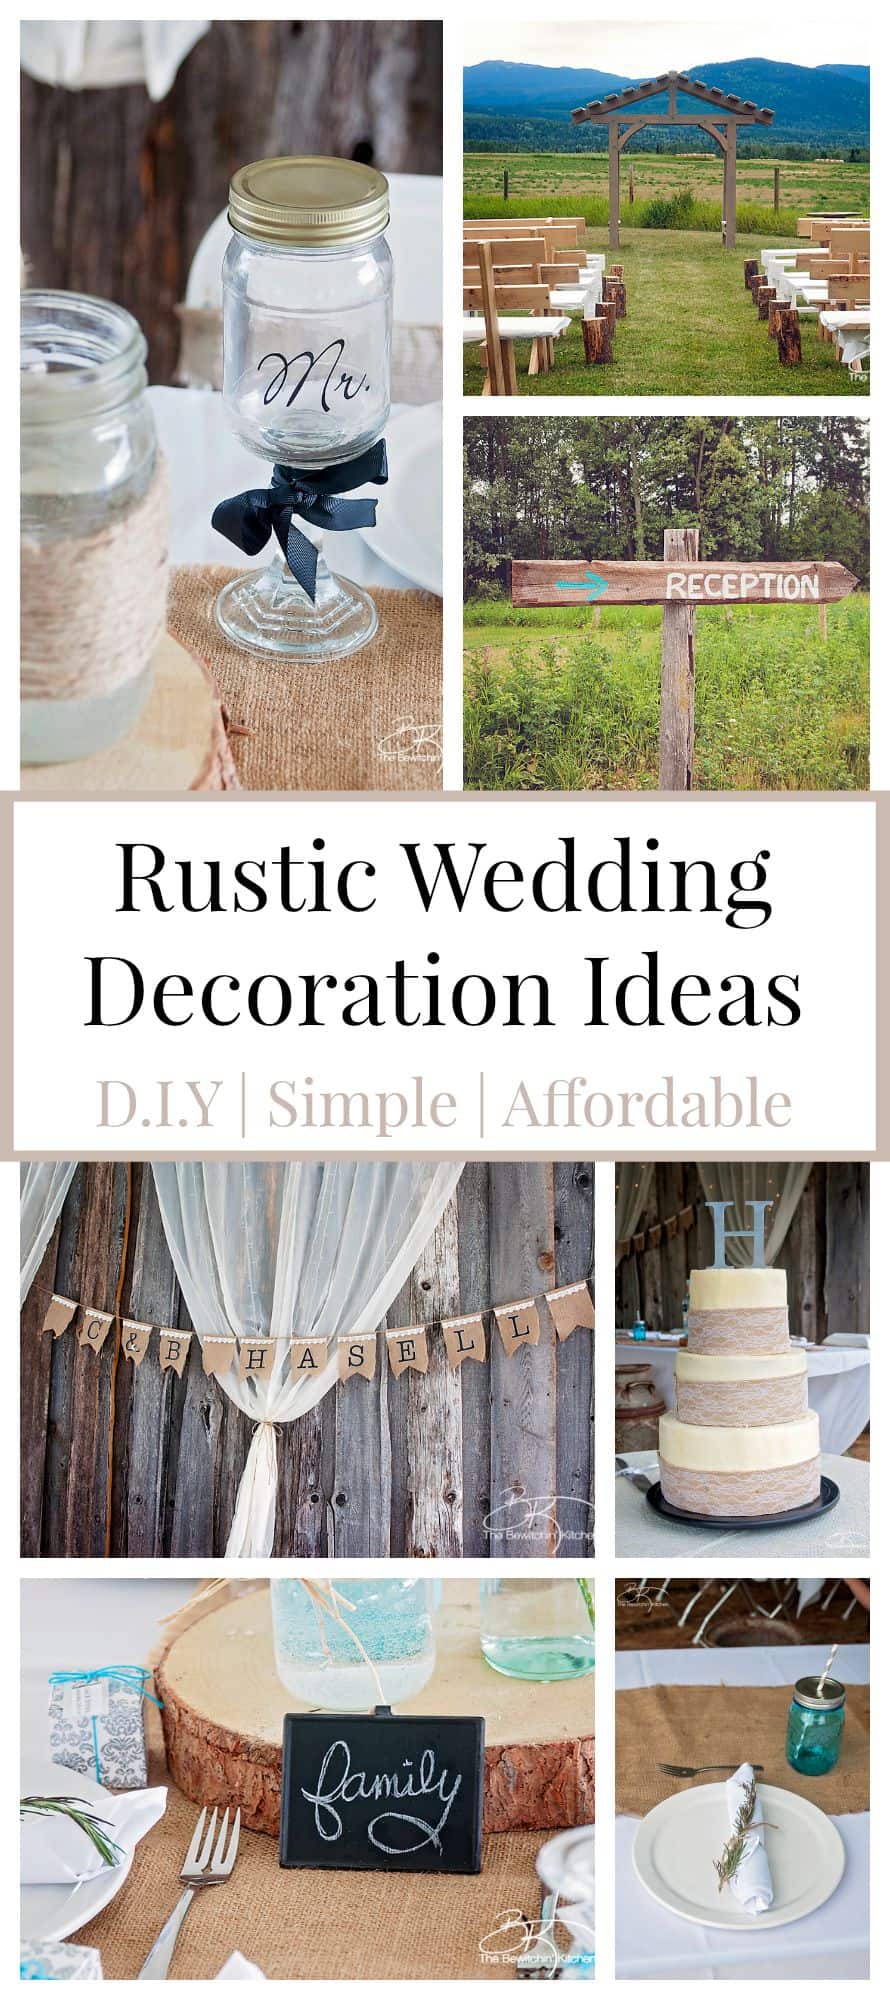 Rustic Wedding Ideas That Are Diy Affordable The Bewitchin Kitchen